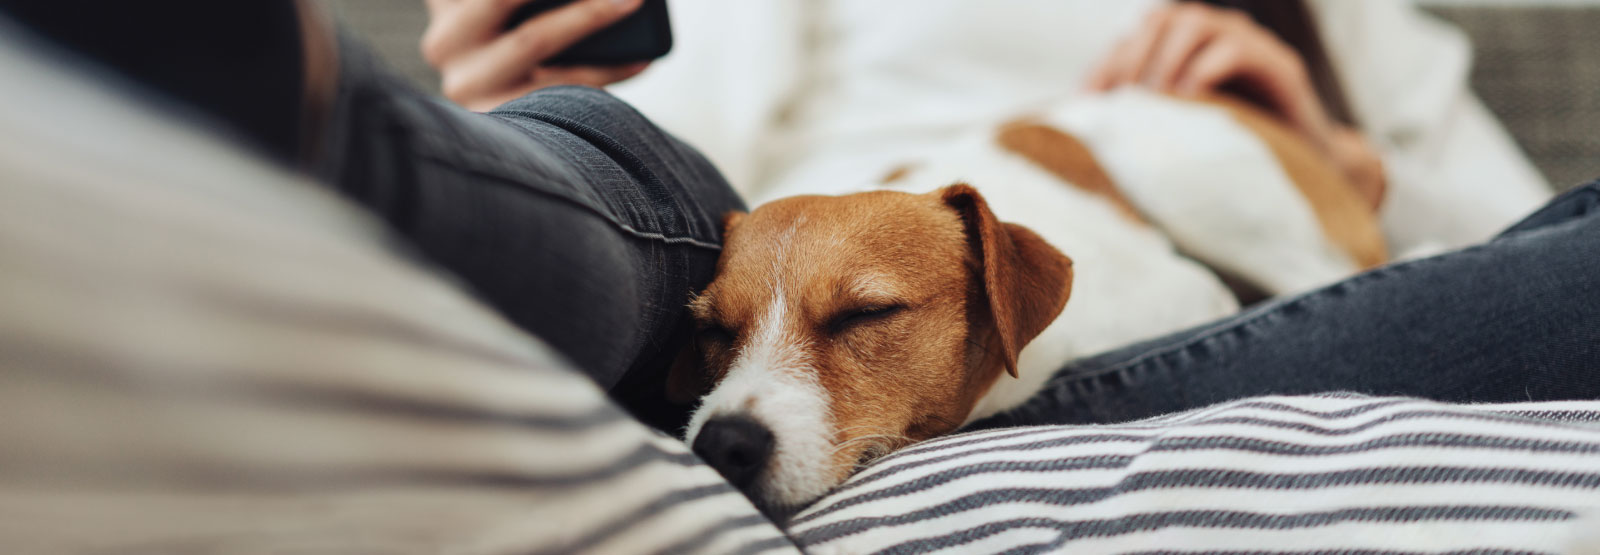 Jack Russell dog sleeping in owner's lap